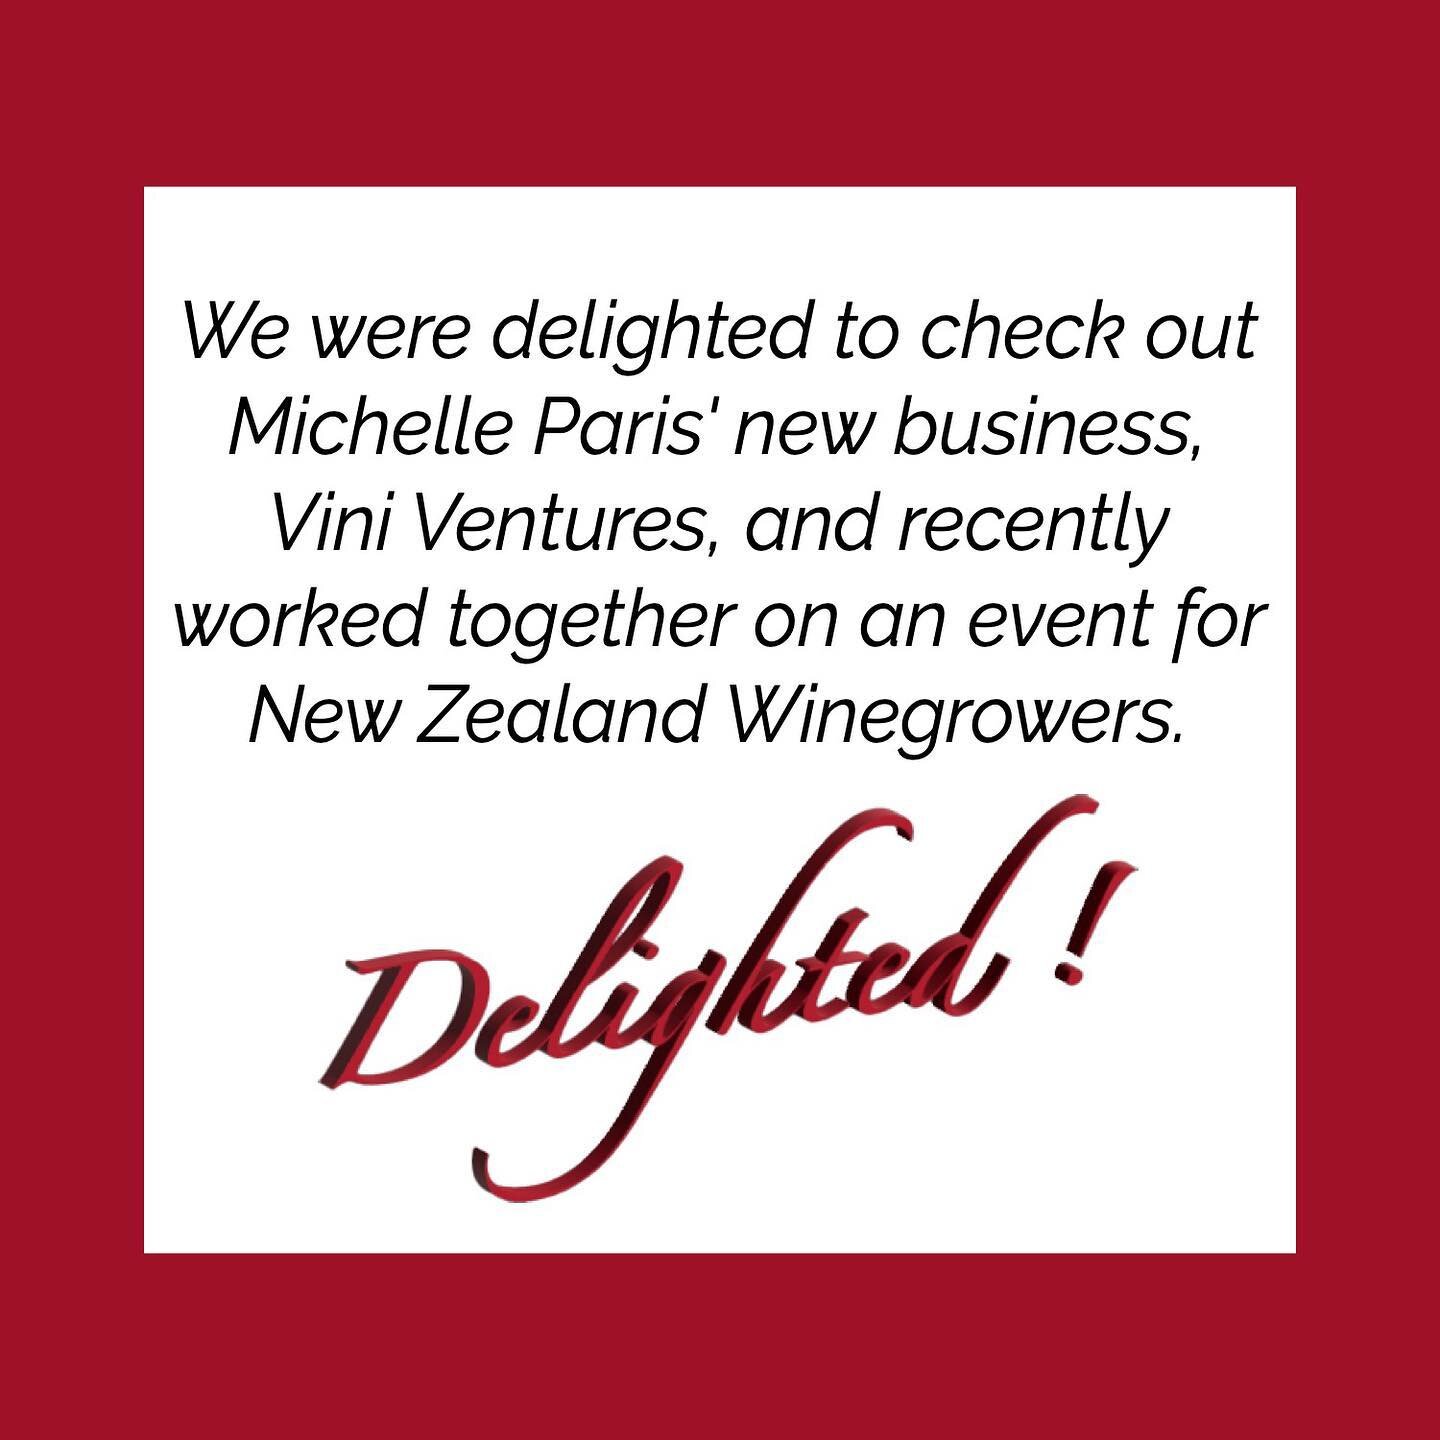 We love hearing from our happy clients. Thanks @nzwinegrowers for this wonderful testimonial! 
.
.
.
.
.
#testimonial #happyclient #winesofinstagram #virtualtasting #samplebottles #winesamples #virtualwinetasting #wineonline #winetasting #wine #wines